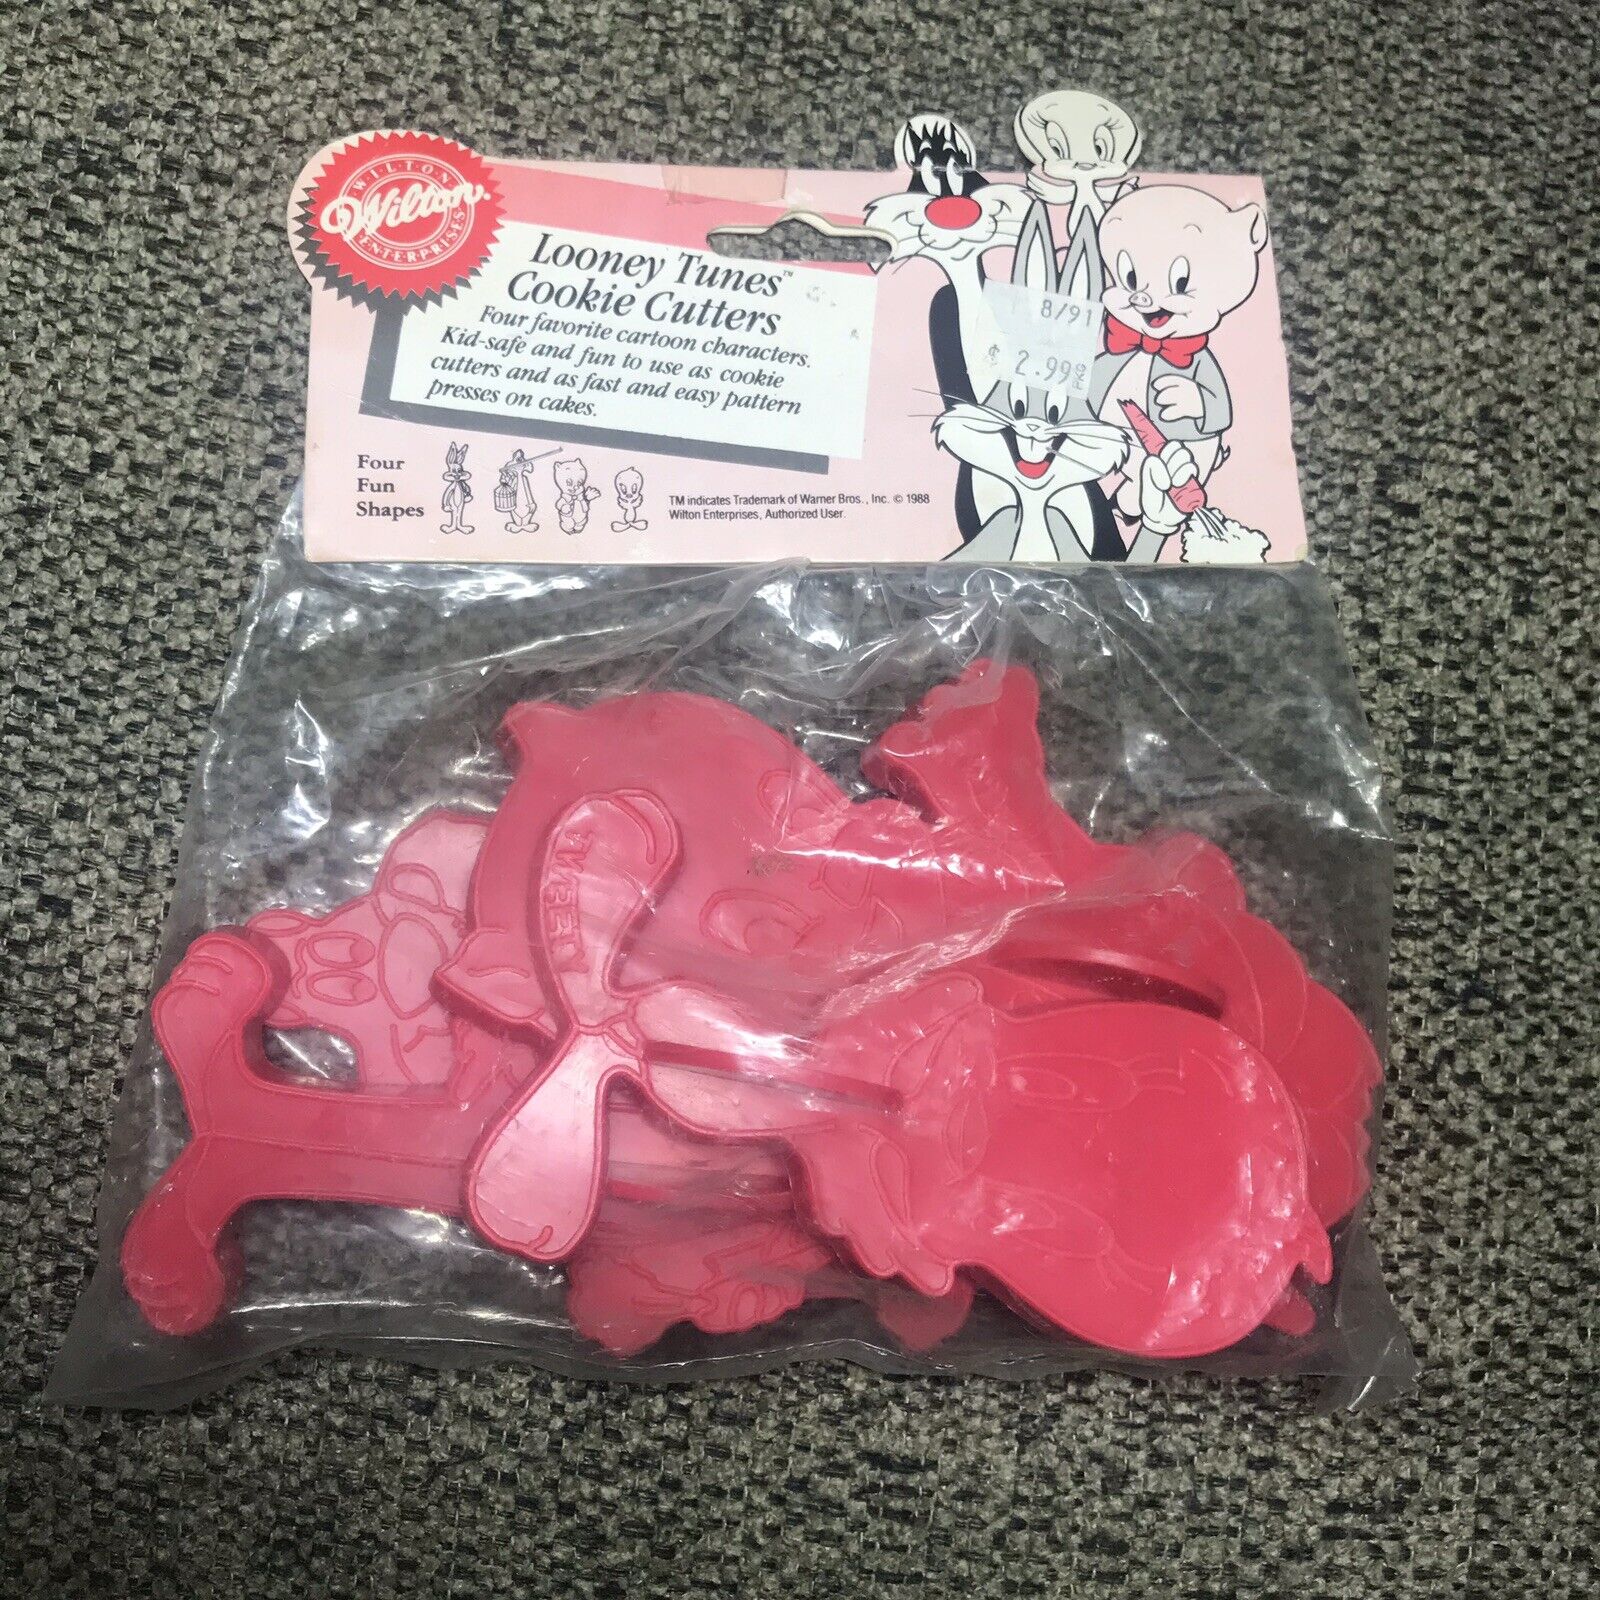 1988 Wilton Looney Tunes Cookie Cutters Bugs Bunny Tweety Sylvester Porky Pig 